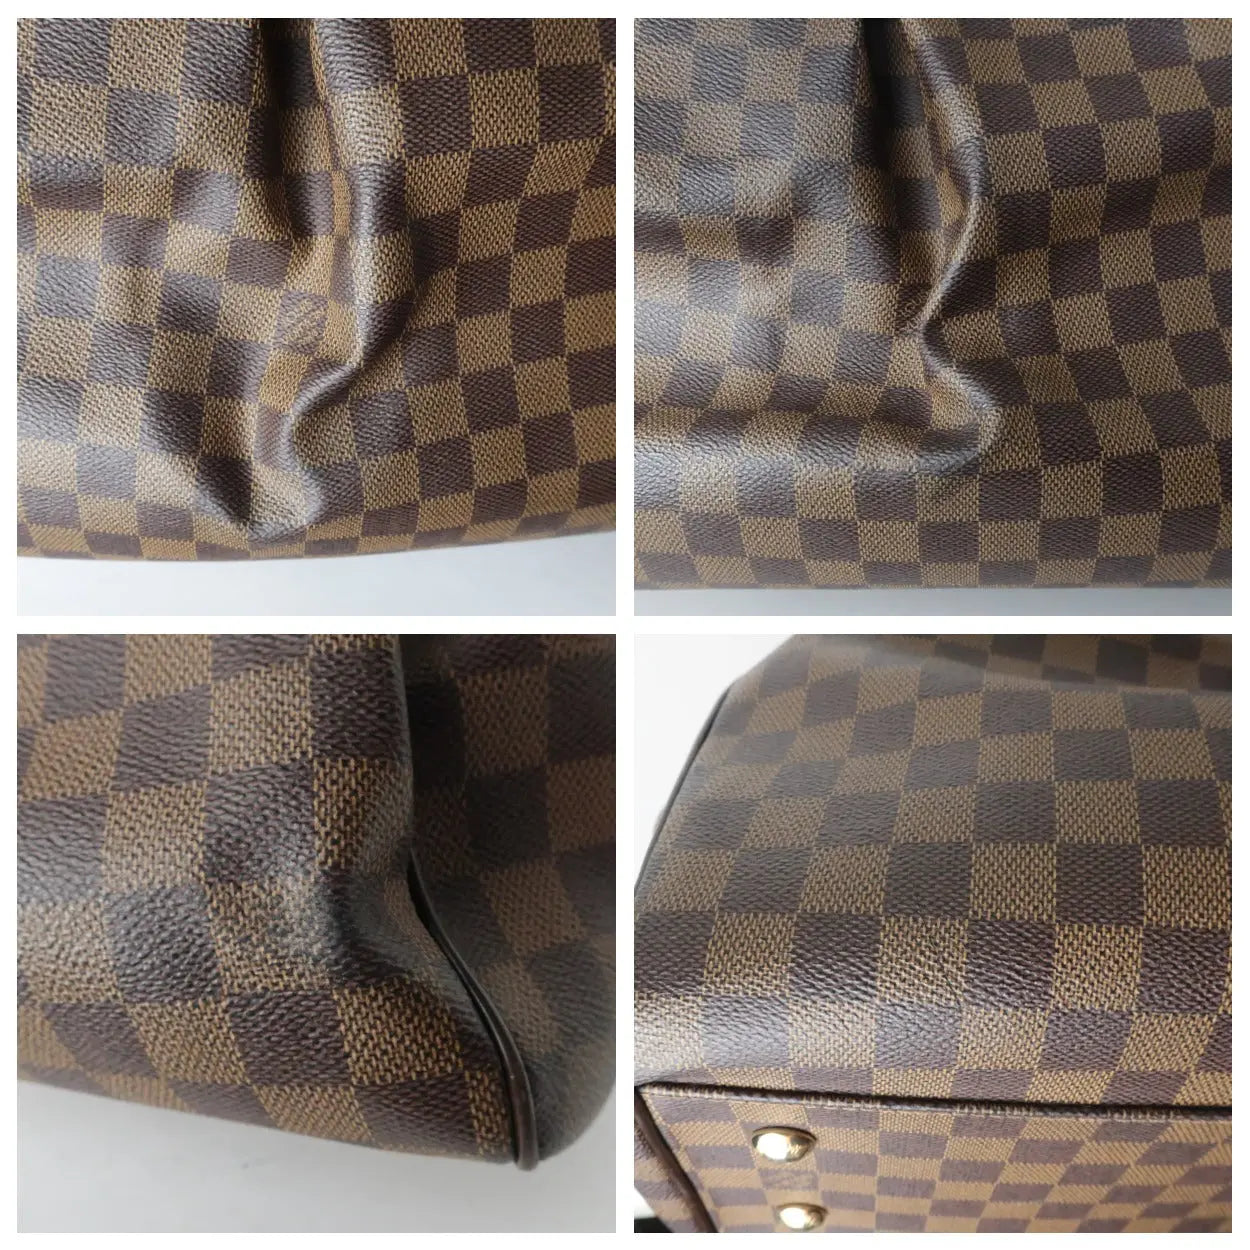 Only 358.00 usd for LOUIS VUITTON Trevi GM Ebene - OUTLET FINAL